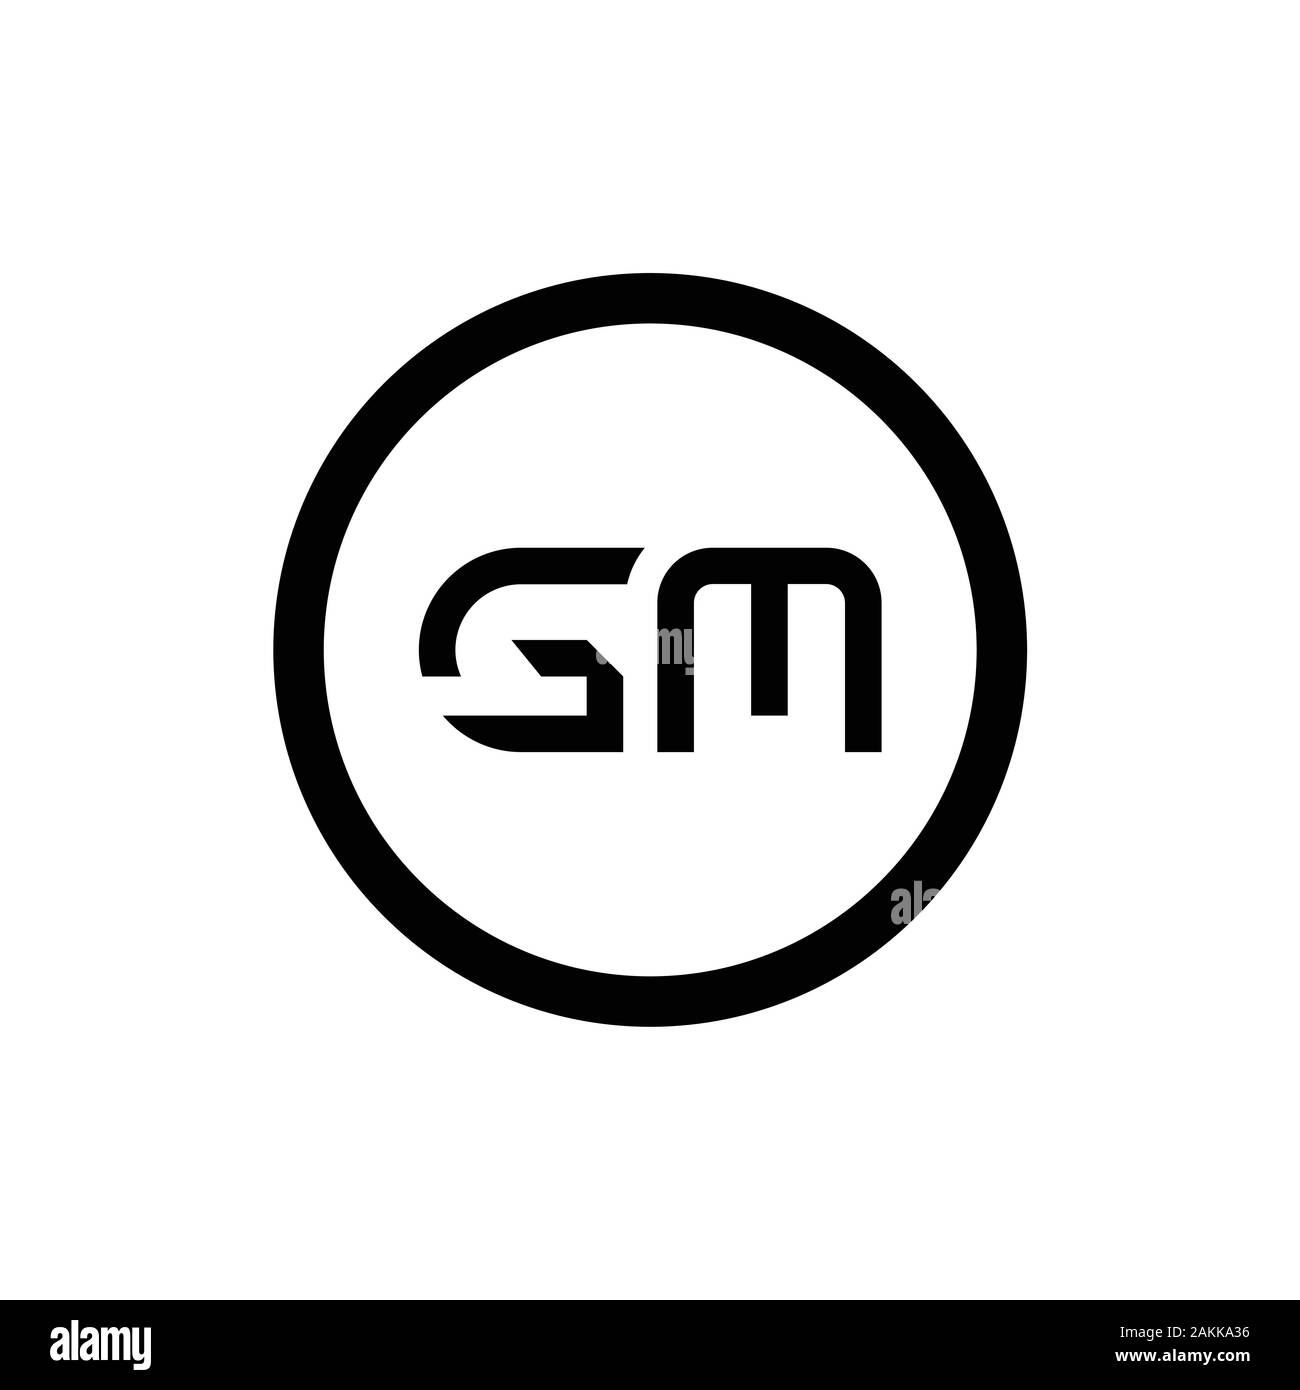 Gm Letter Type Logo Vector & Photo (Free Trial)